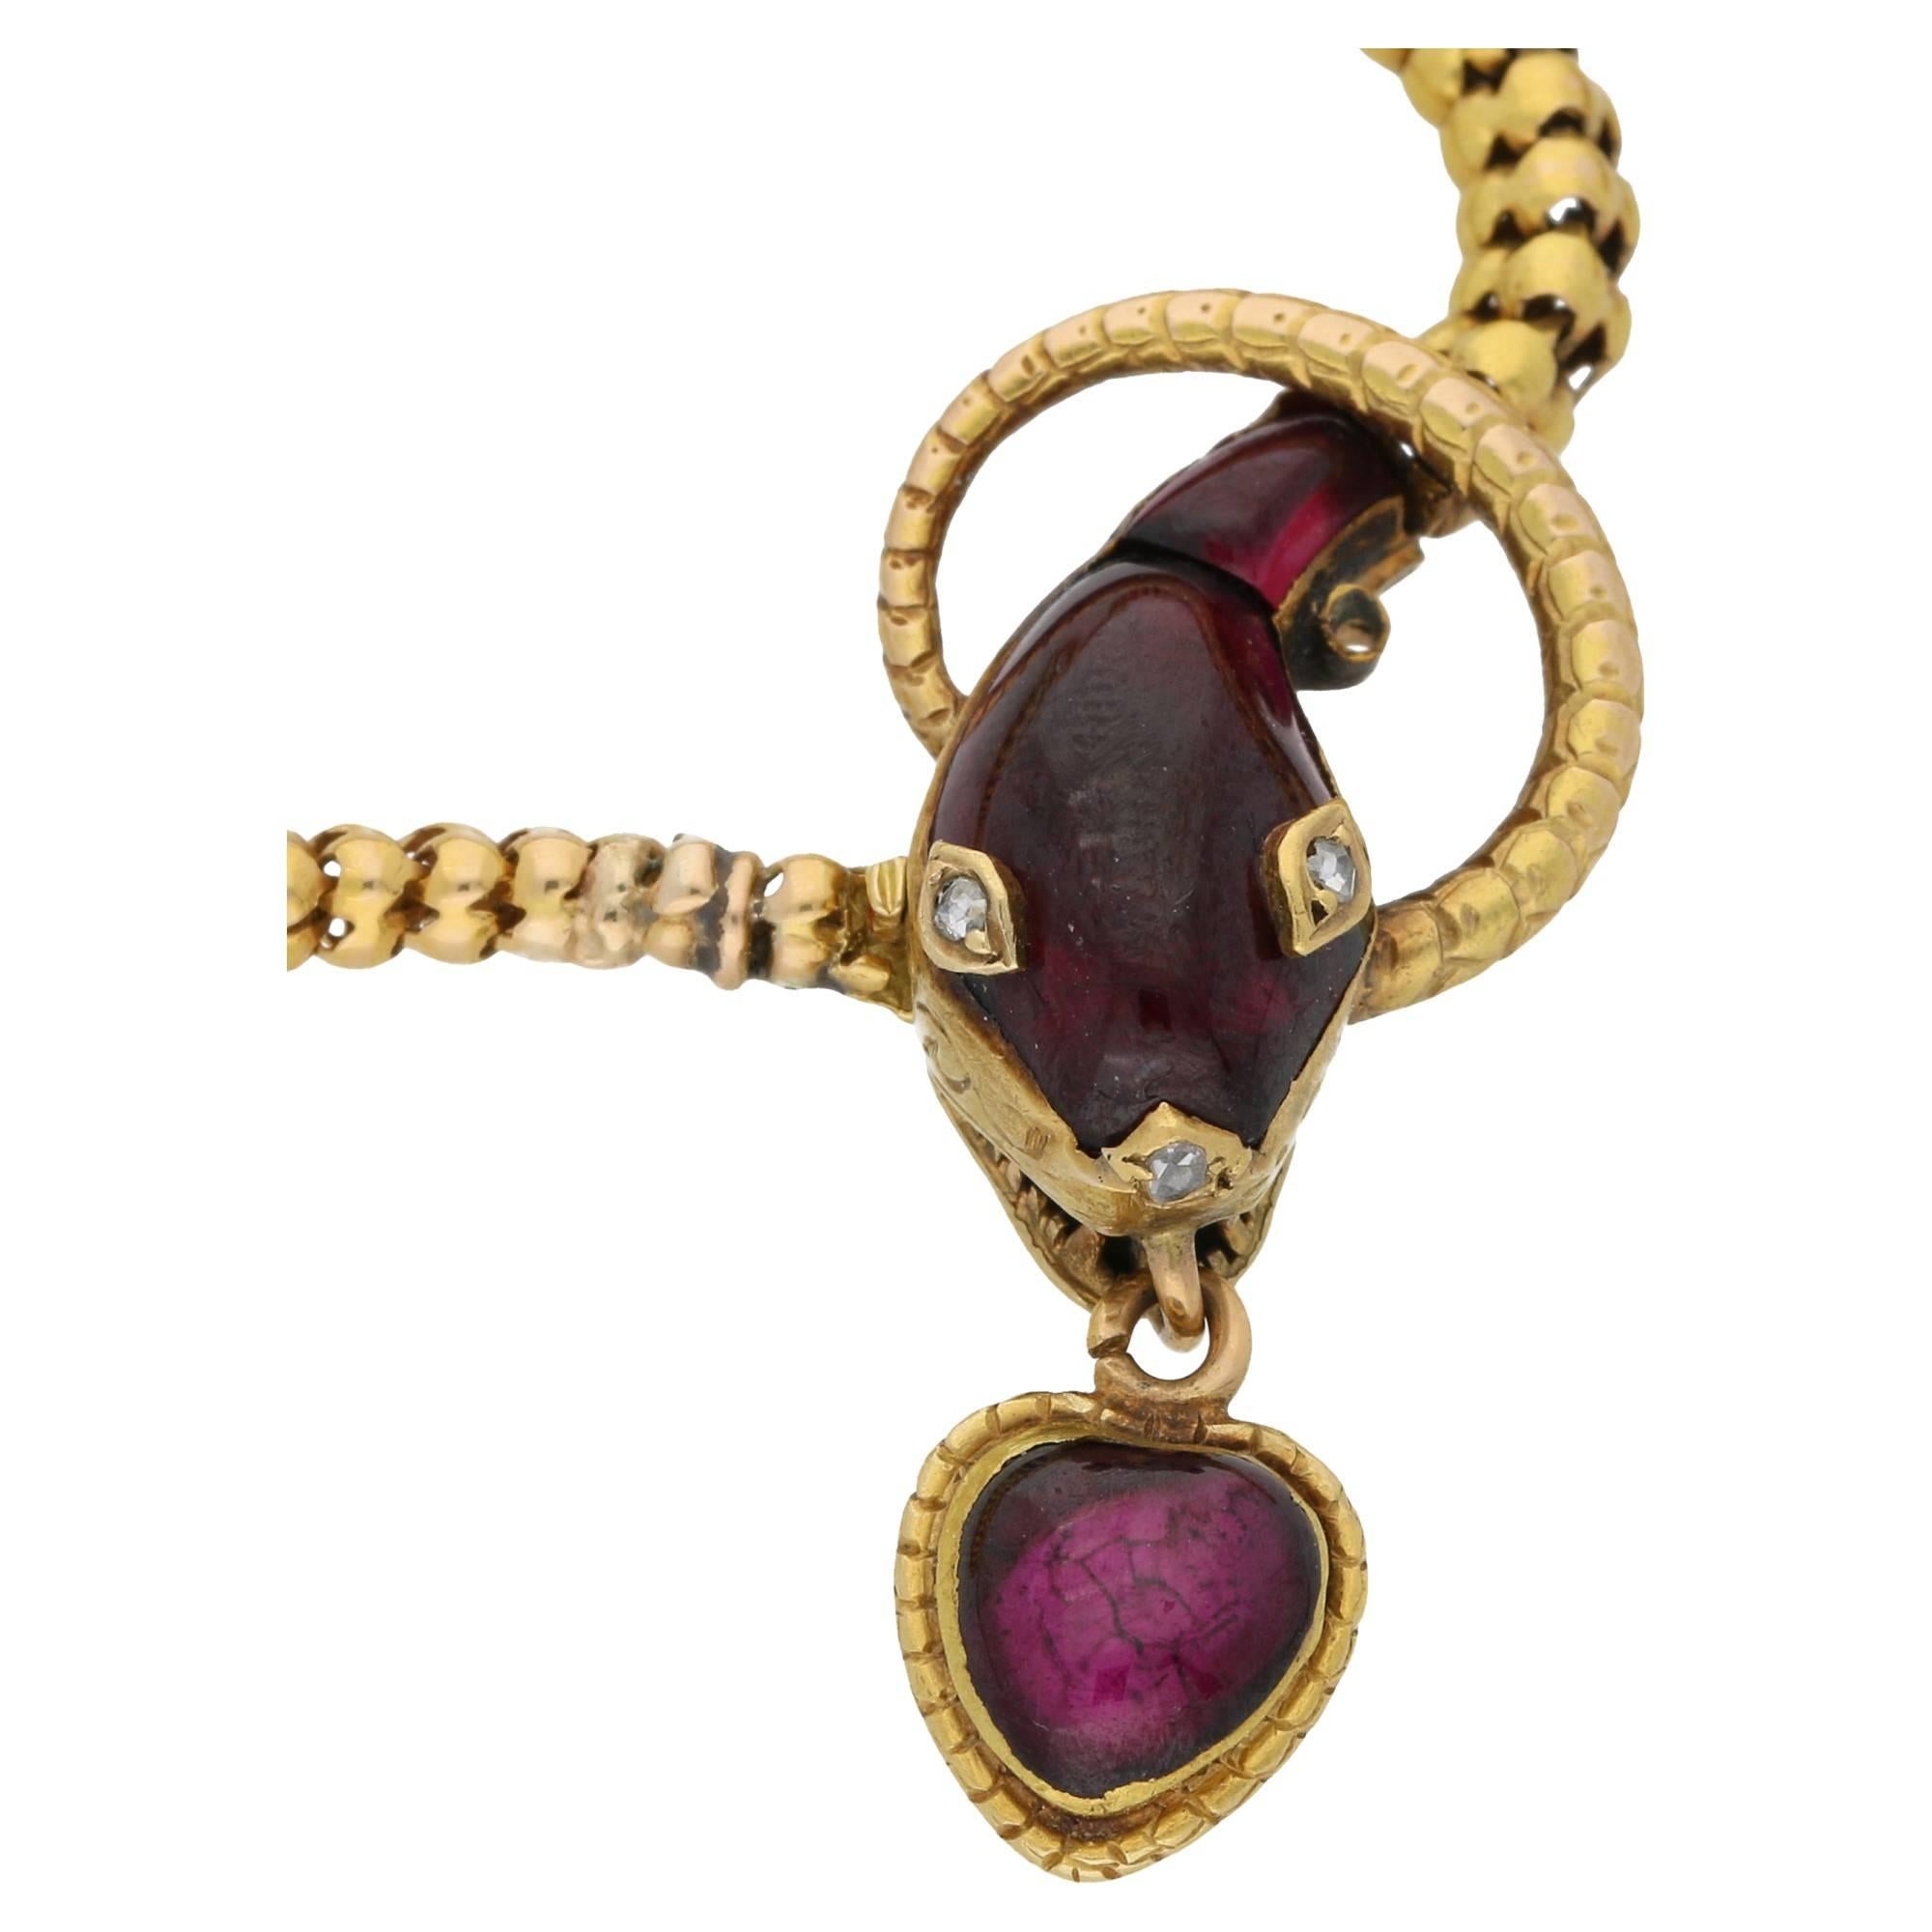 A magnificent Victorian garnet snake chain necklace. Suspended from the snakes mouth hangs a small heart shaped locket, fronted with a foil backed cabochon garnet rub over set in 9ct yellow gold. The head is a free form foil backed cabochon garnet,